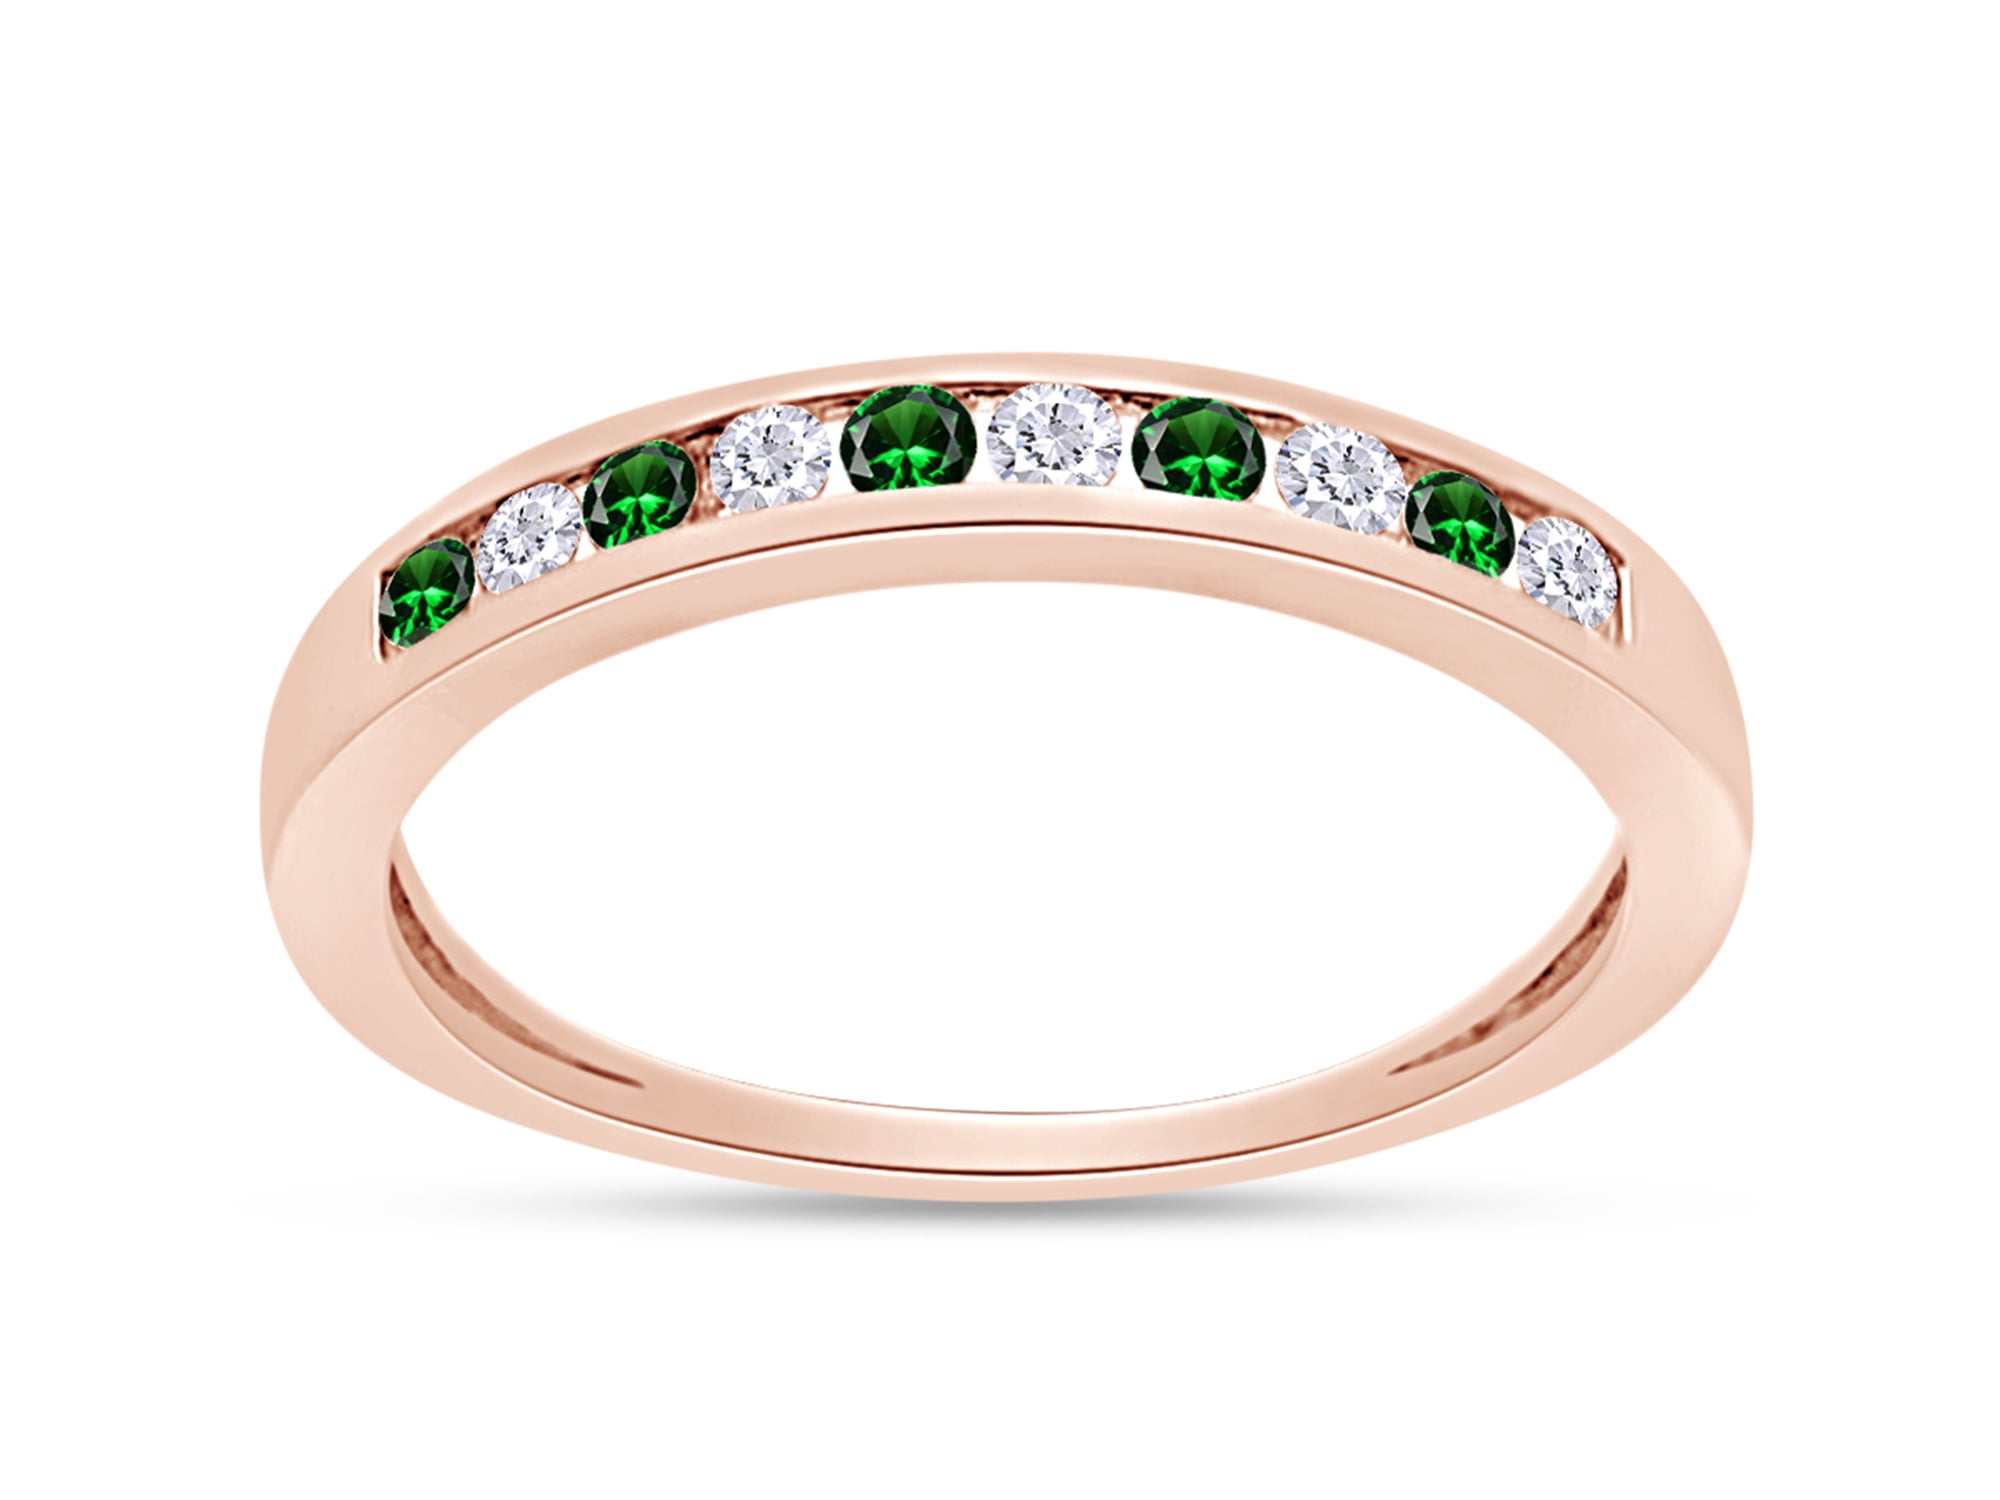 Details about   4.25 Ct Baguette Emerald Ring Women Wedding Jewelry Gift 14K White Gold Plated